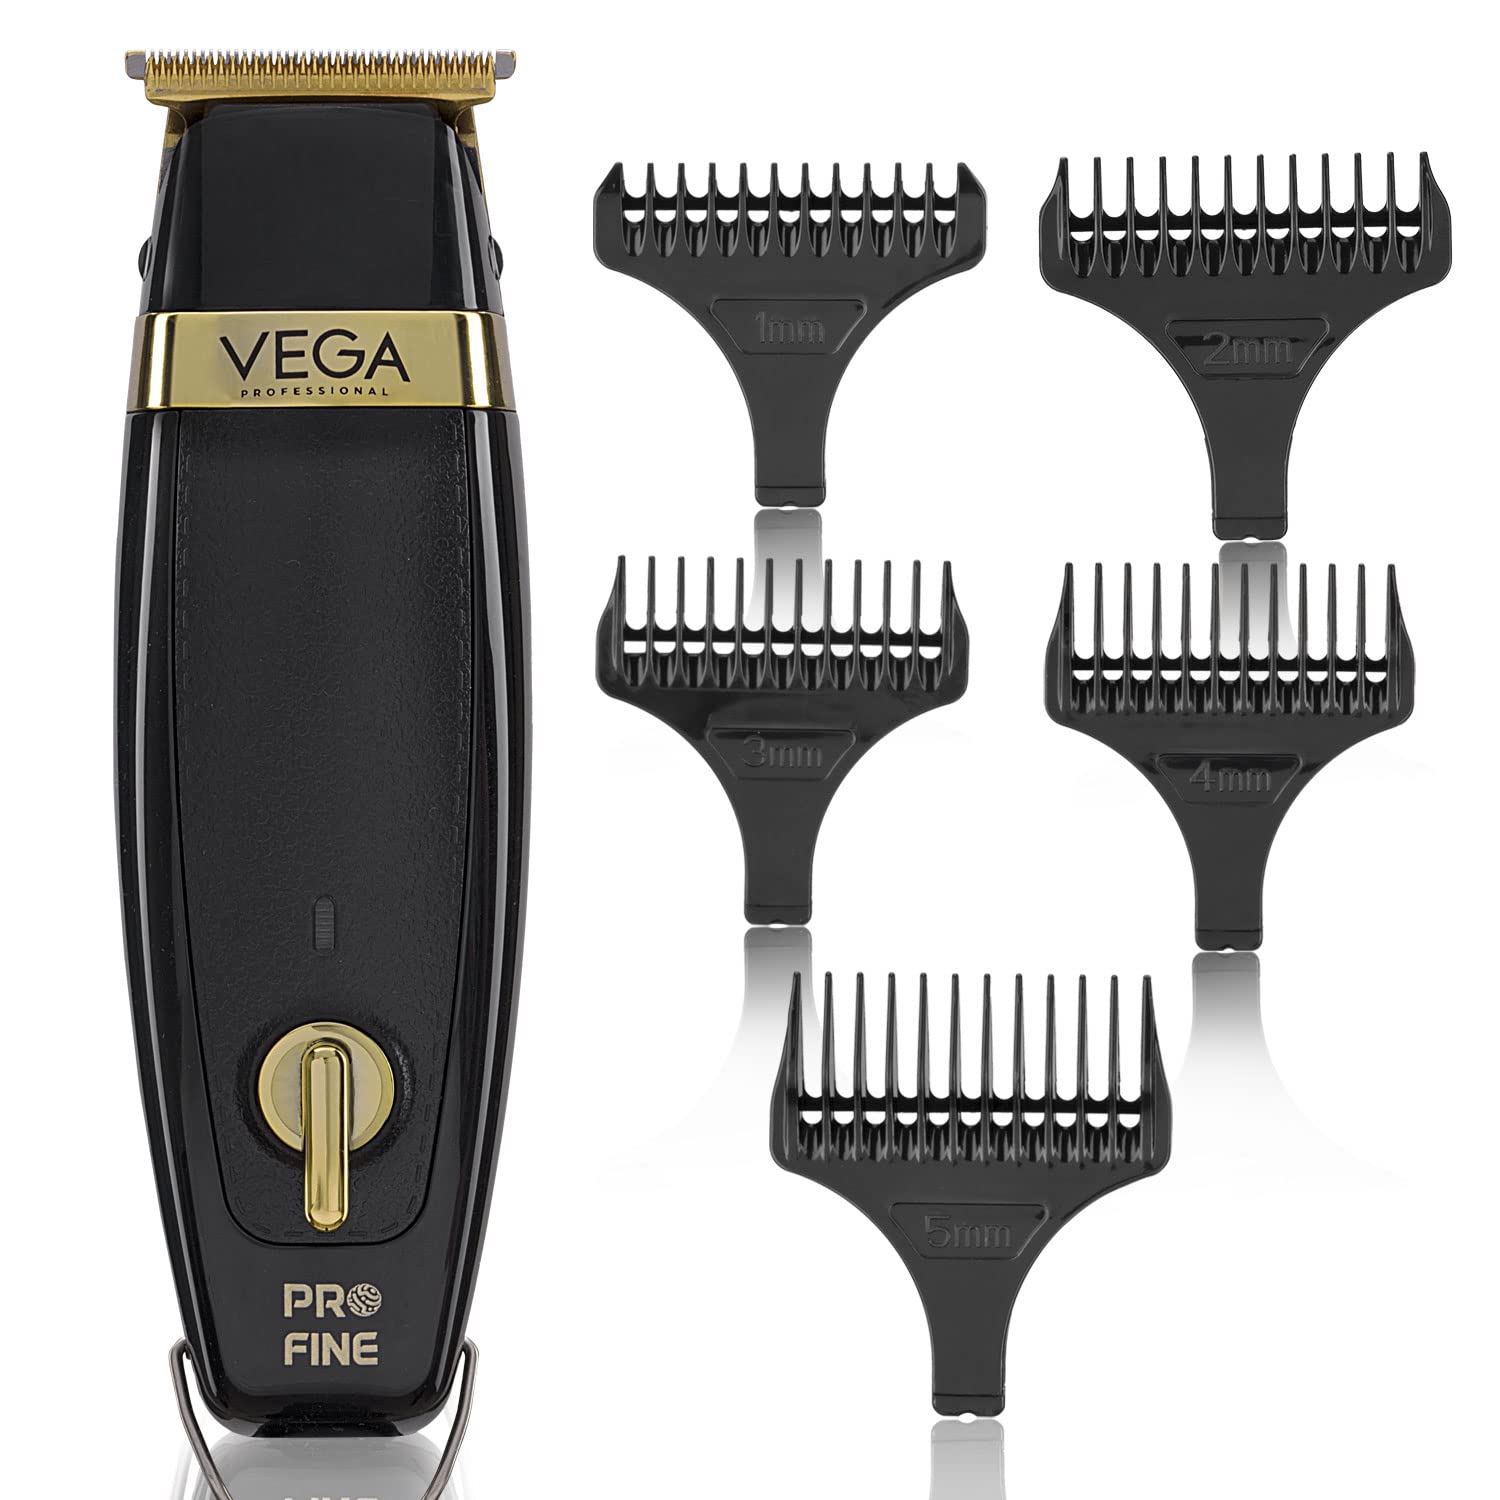 VEGA Professional Pro Fine Hair Trimmer with 300 mins Runtime, (VPMHT-05), Black